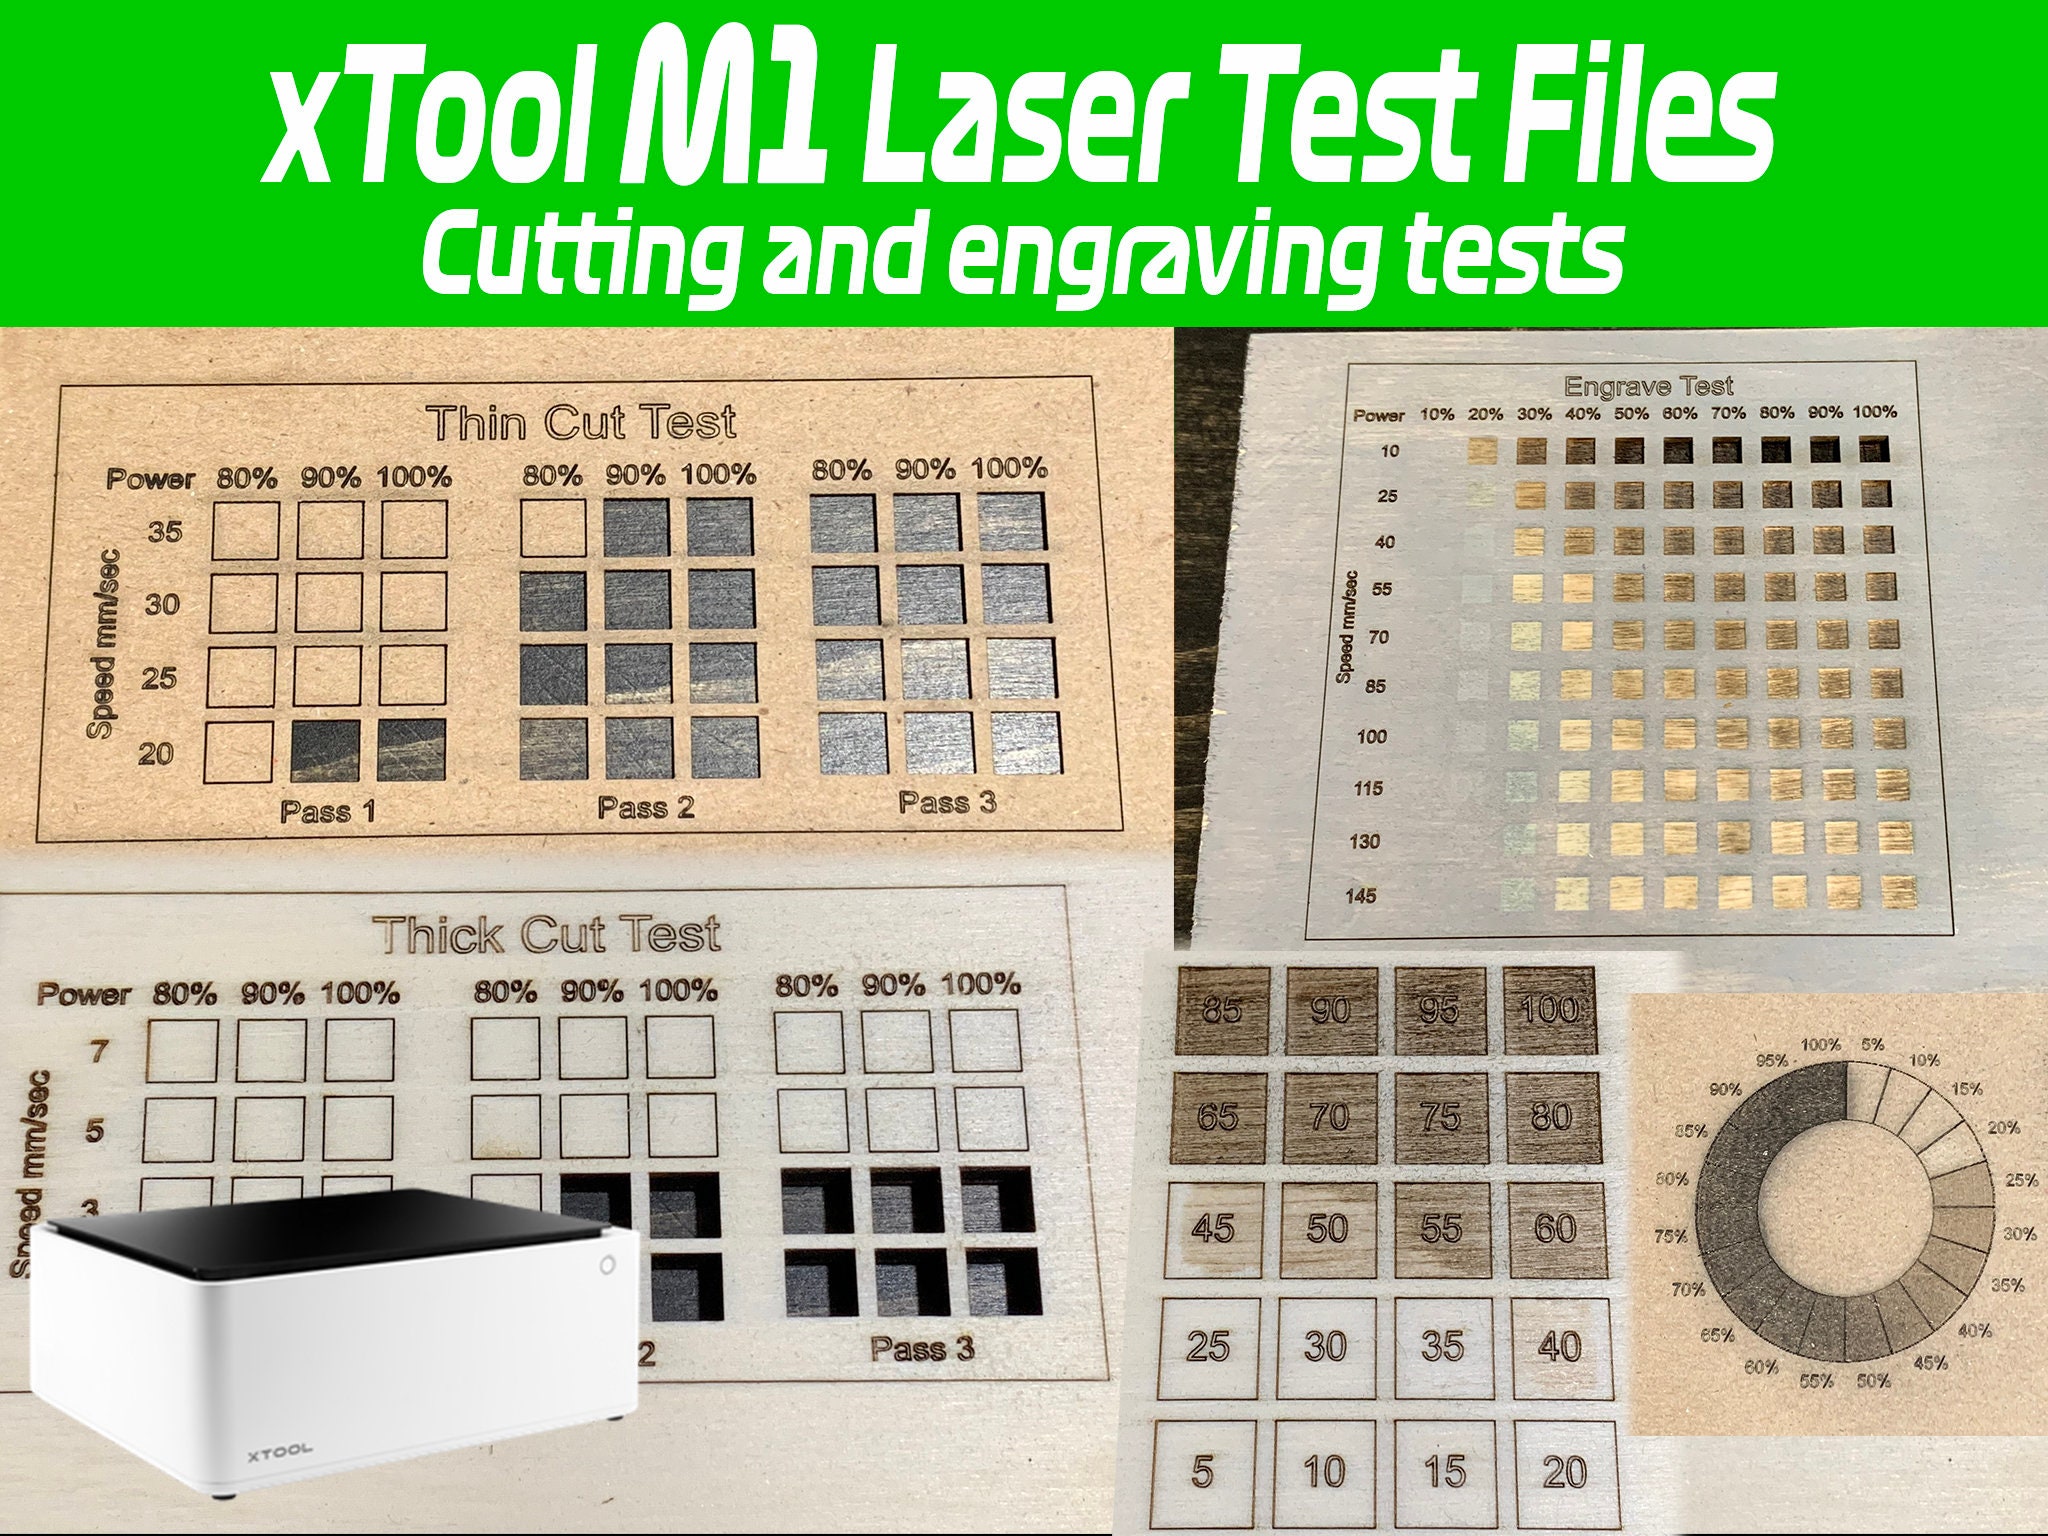 Creative Space Xtool M1 Laser Test Files Engrave Test Cut Test 